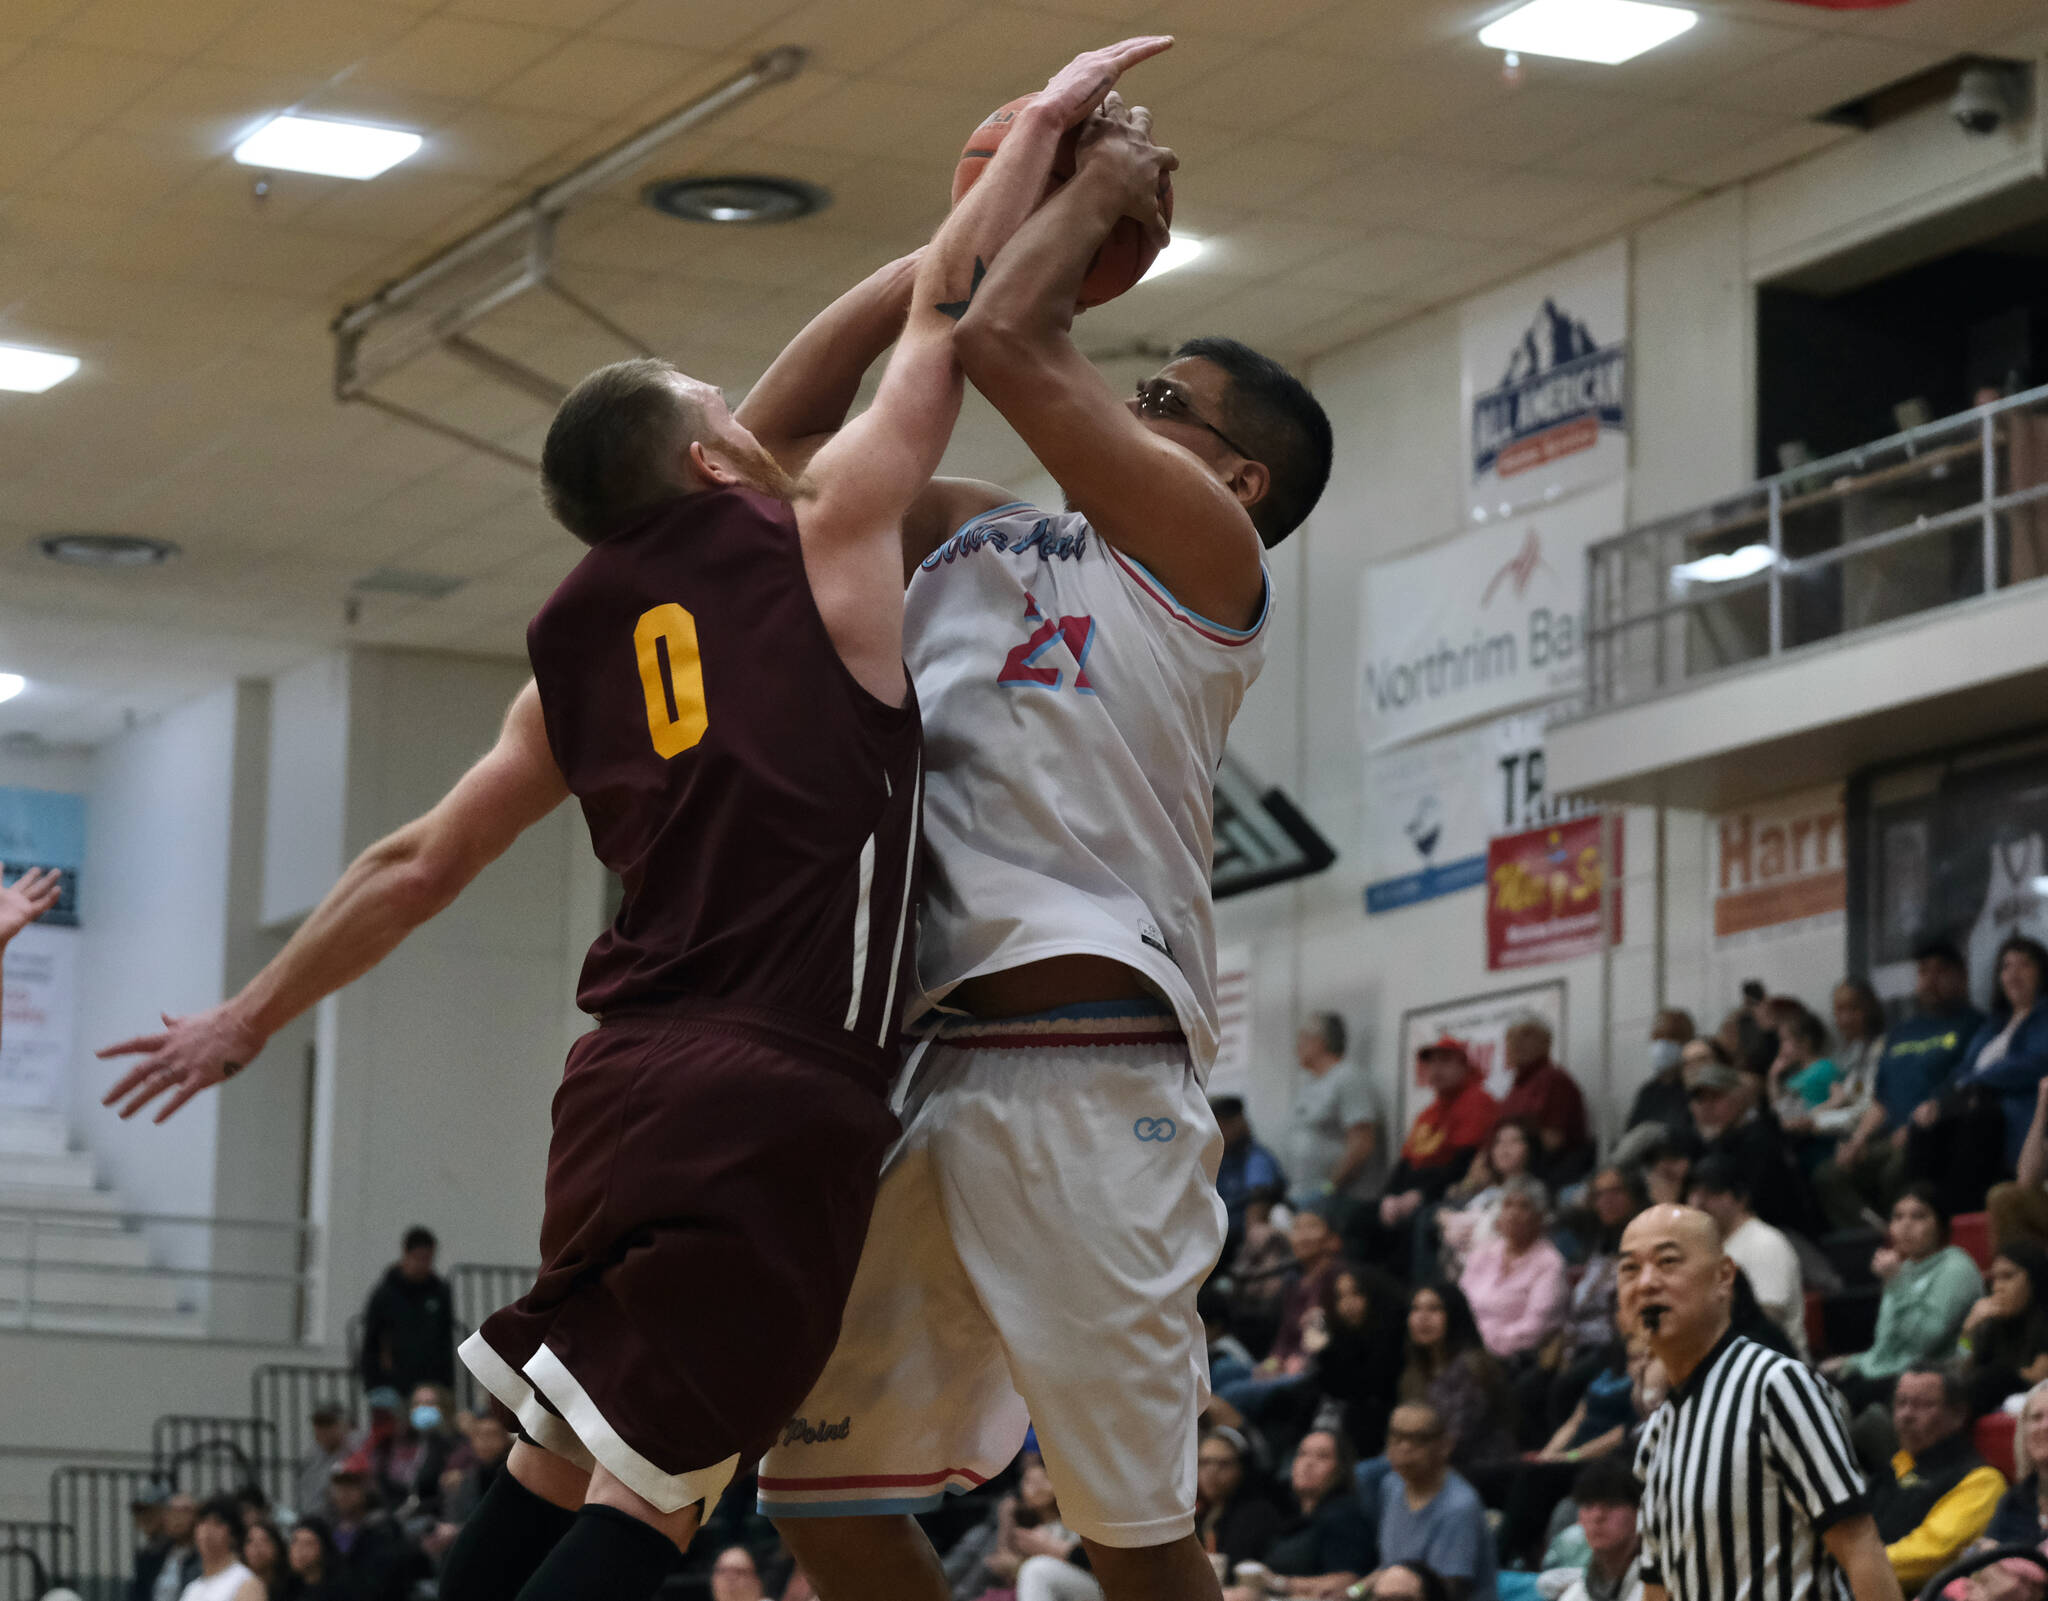 Klukwan's Daniel Stickler (0) defends a shot by Hoonah's Lucas Johnson (21) during Friday's C Bracket elimination game. Klukwan won 78-65 and will play Juneau Filcom in Saturday's championship. (Klas Stolpe/For the Juneau Empire)